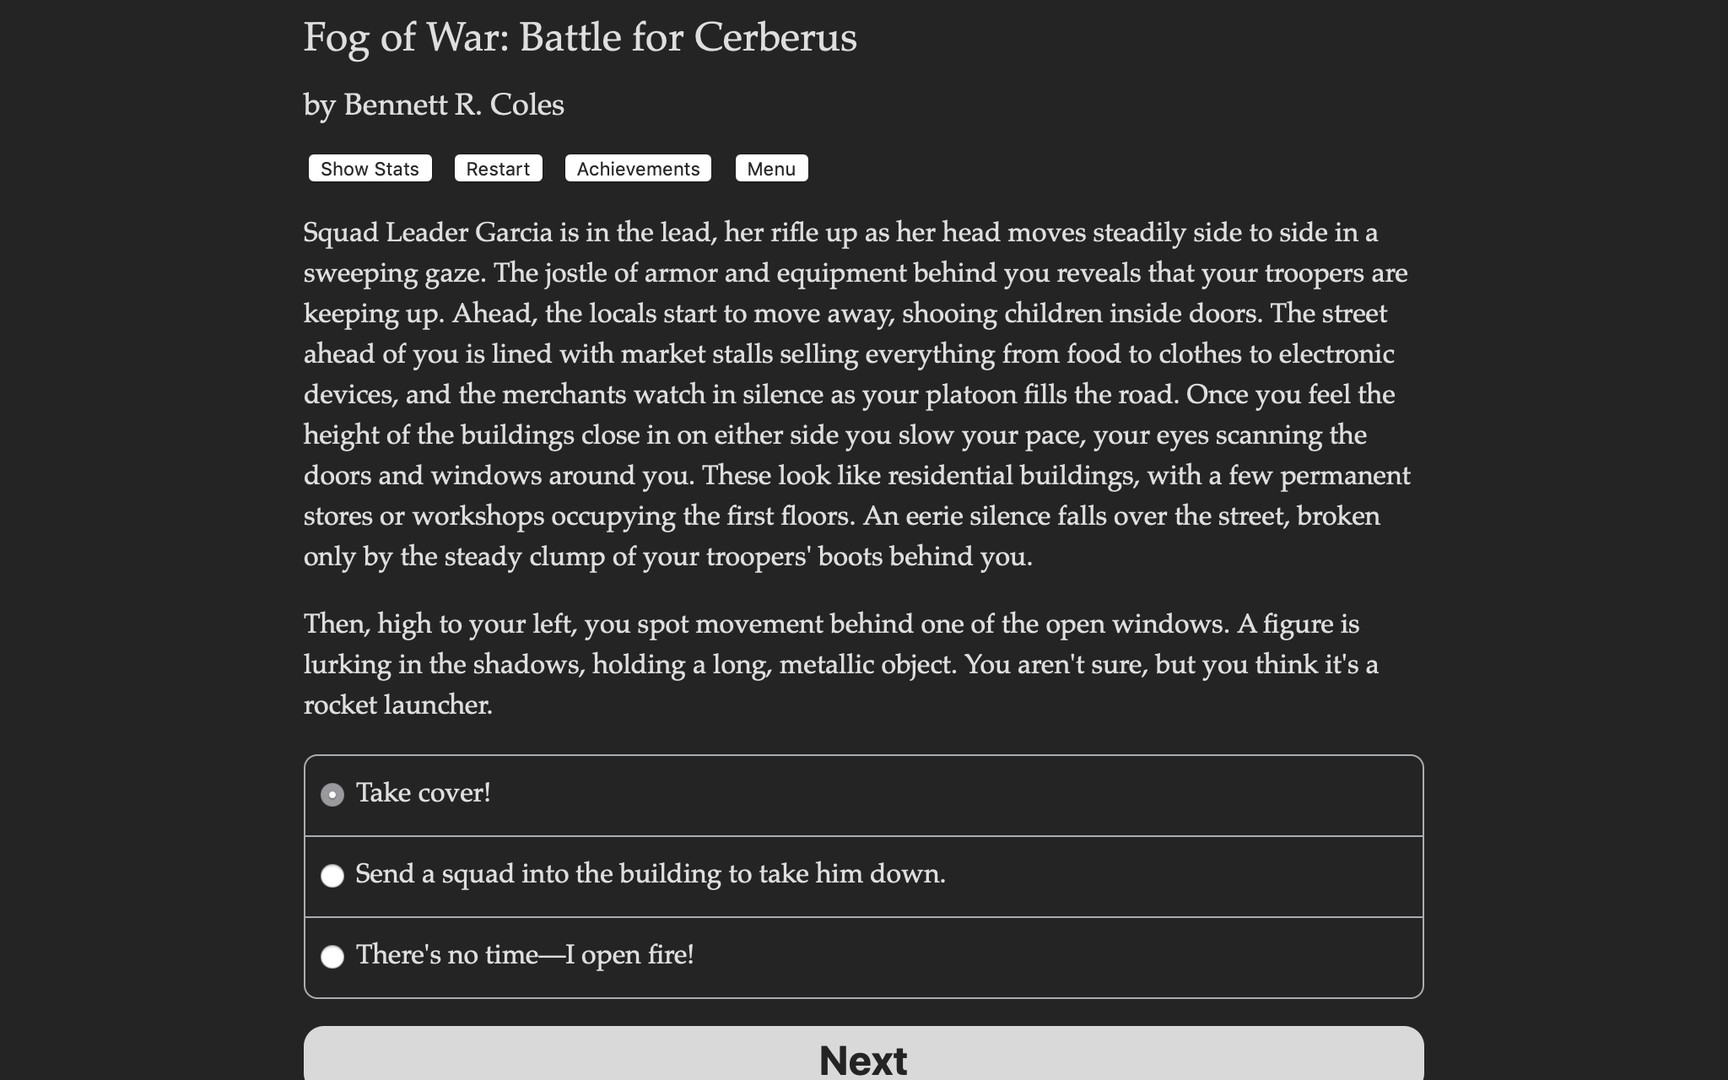 Fog of War: The Battle for Cerberus Free Download